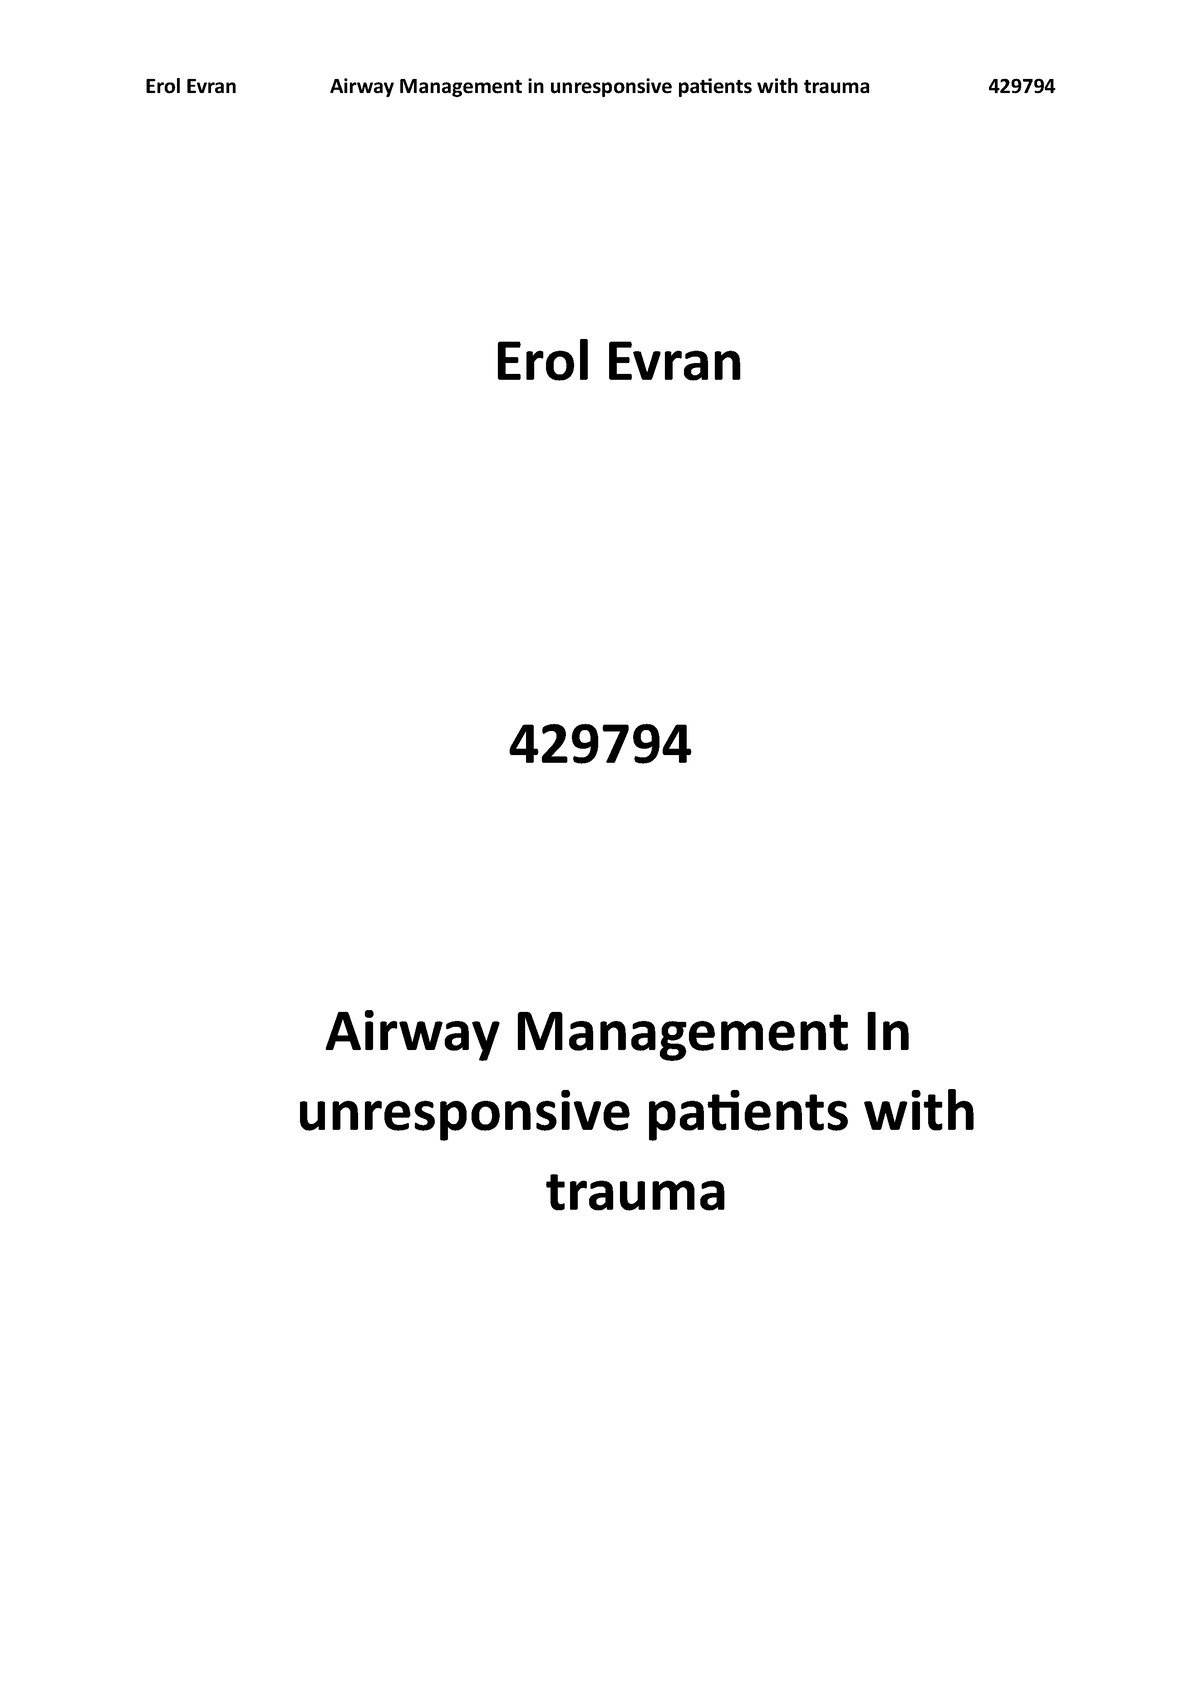 Airway Management Lecture Notes Erol Evran Airway Management In Unresponsive Patients With 6588